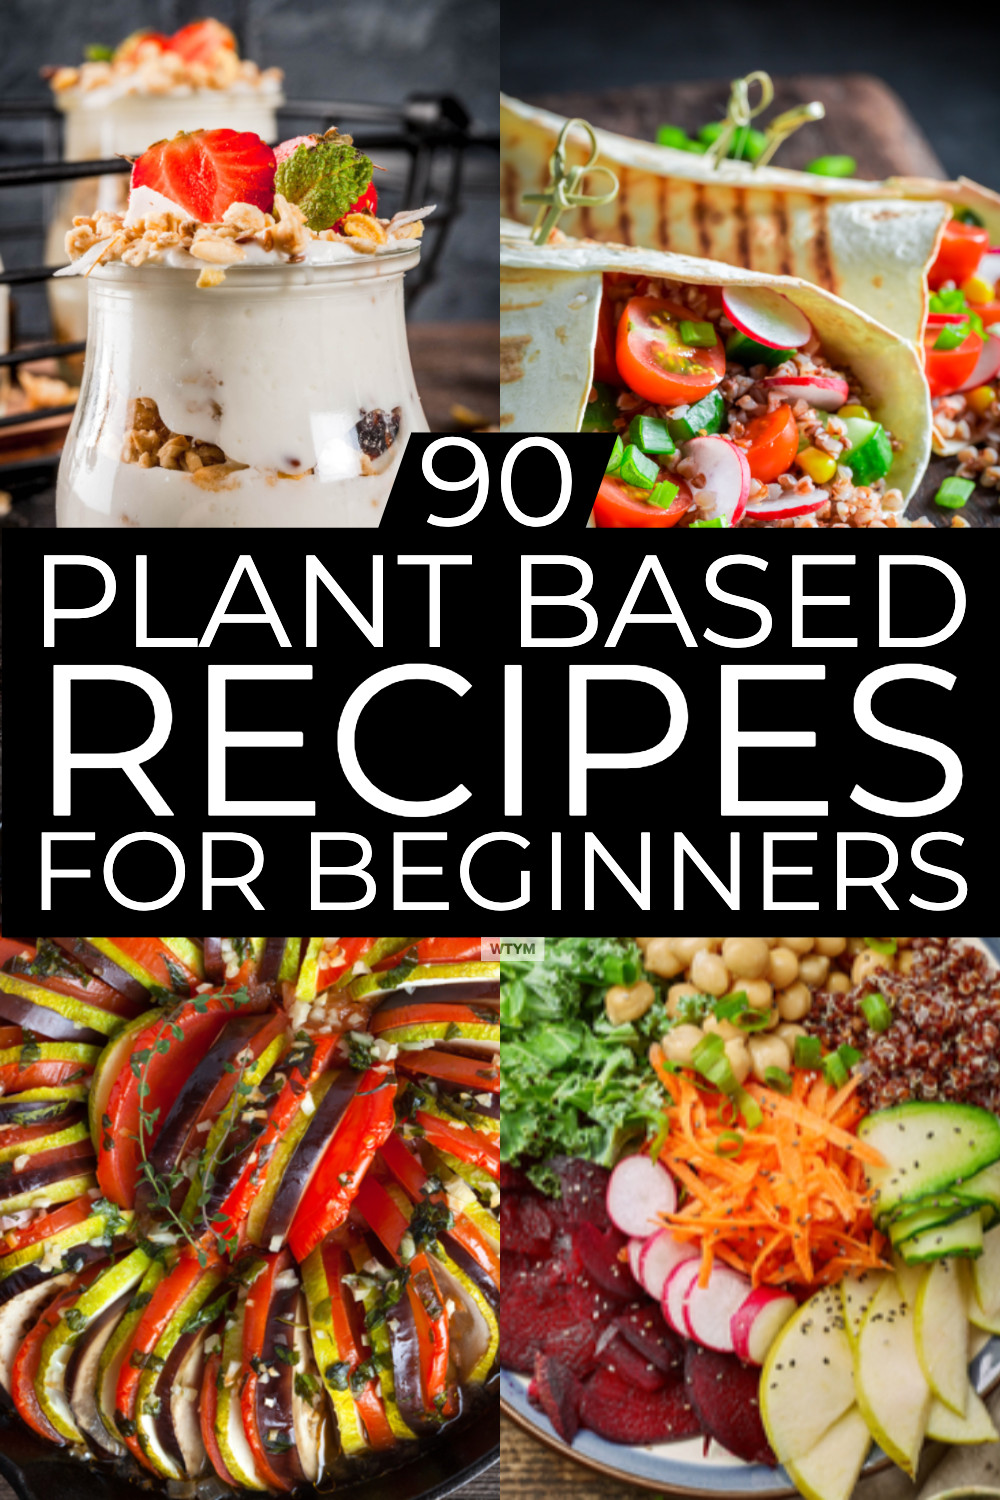 Plant Based Recipes For Beginners Grocery List
 Plant Based Diet Meal Plan For Beginners 90 Plant Based